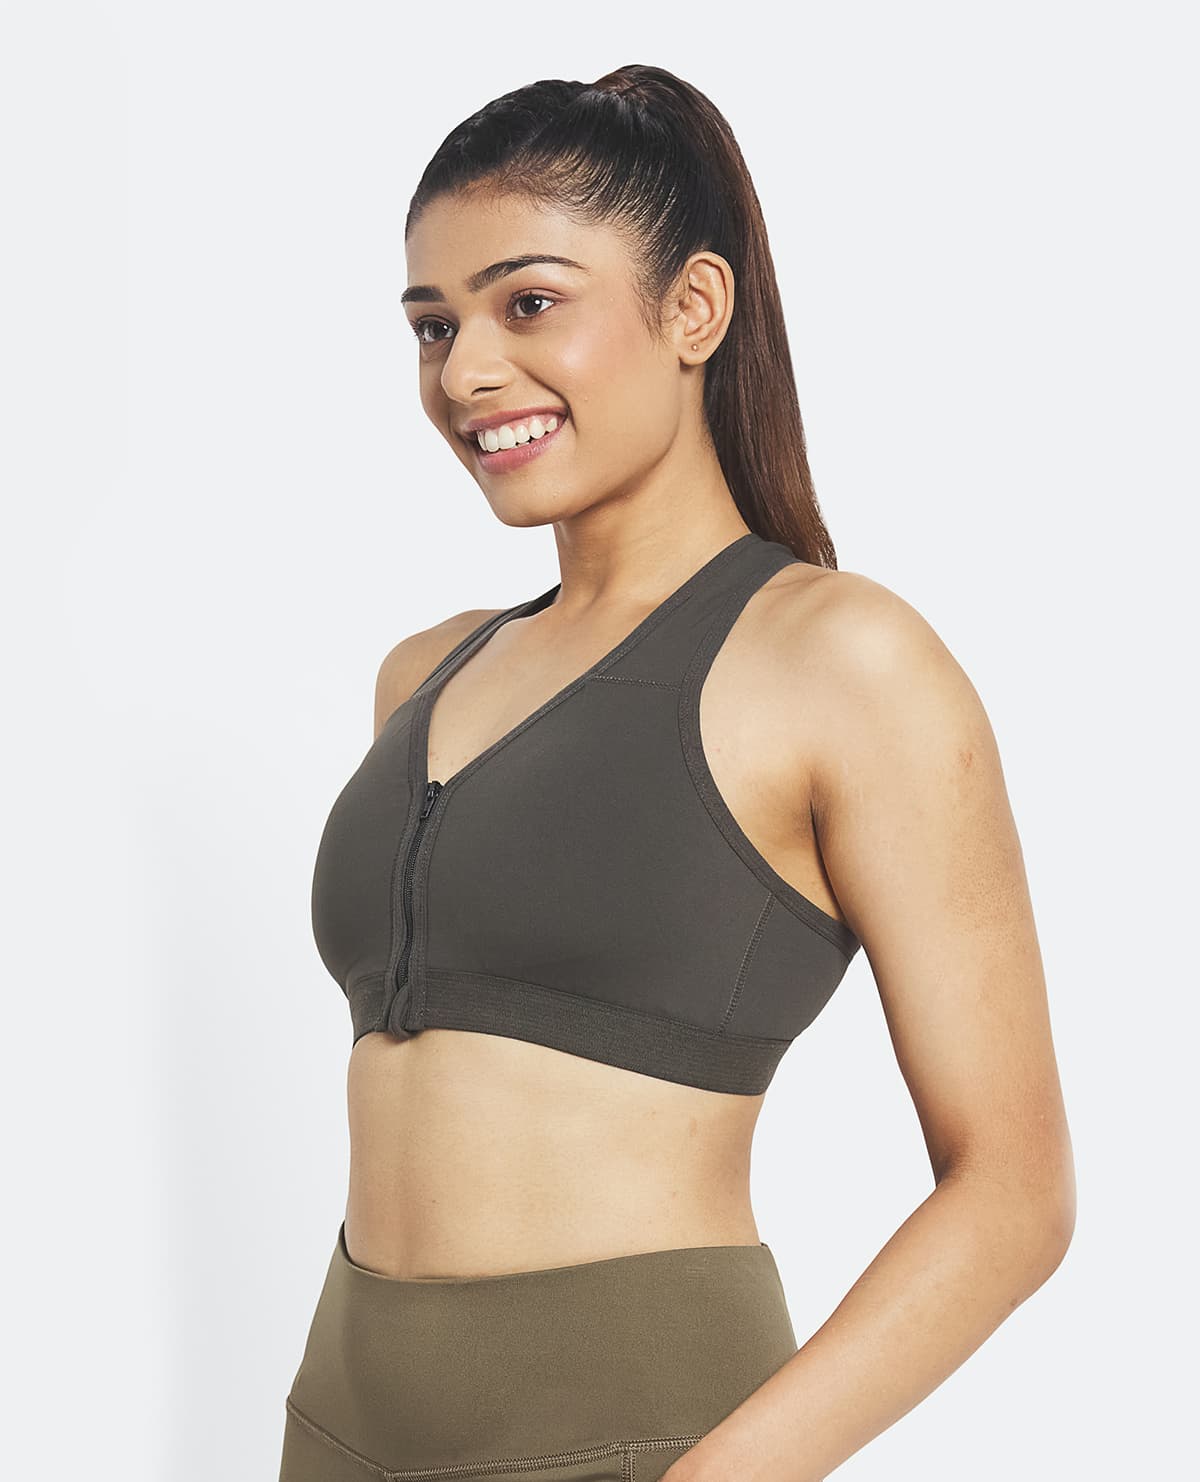 Steel Mid Support Sports Bra – Kica Active